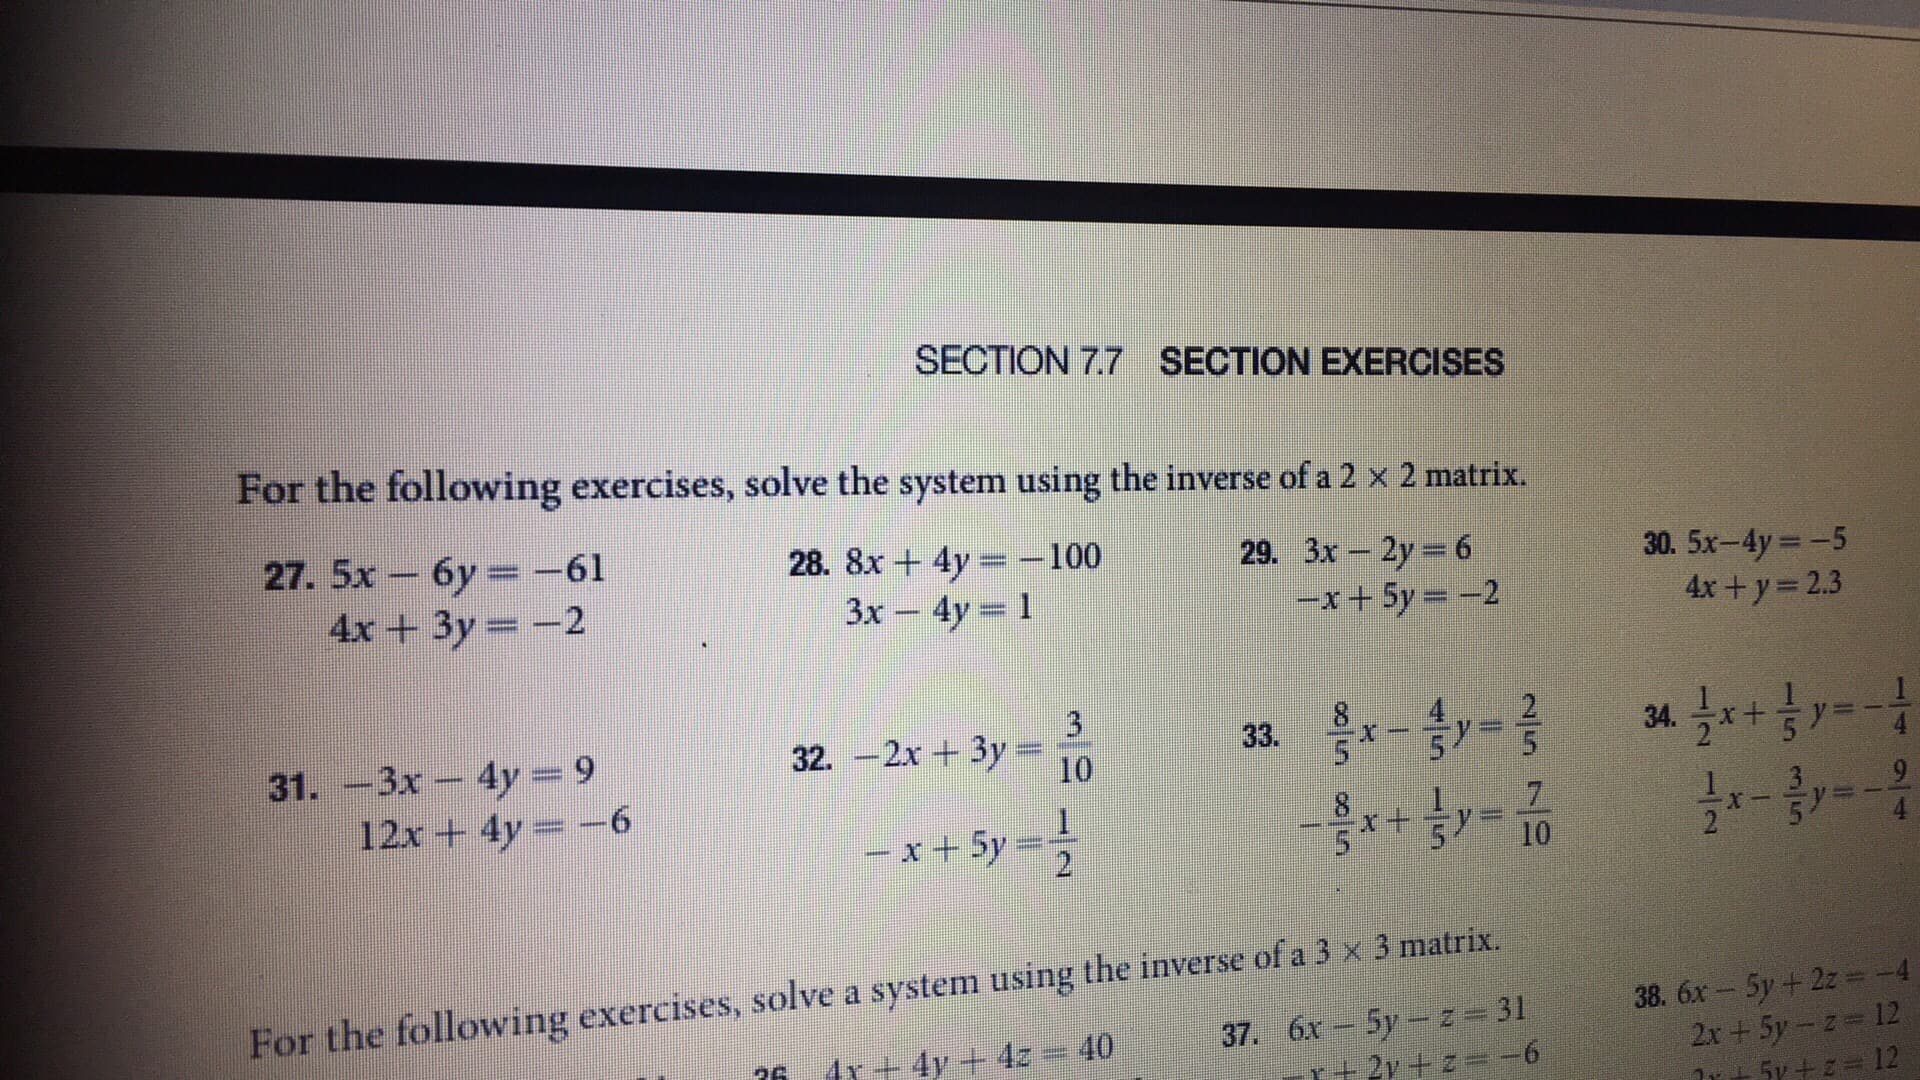 SECTION 7.7
SECTION EXERCISES
For the following exercises, solve the system using the inverse of a 2 x 2 matrix.
27. 5x-6y =-61
4x+3y 2
28. 8x + 4y-:-100
3x -4y 1
29. 3x-2y = 6
30. 5x-4y -5
4x+y- 2.3
-x + 5y =-2
31. -3x - 4y 9
2 5
12x + 4y =-6
For the following exercises, solve a system using the inverse of a 3 x 3 matrix
38. 6x- 5y+2z-4
12
